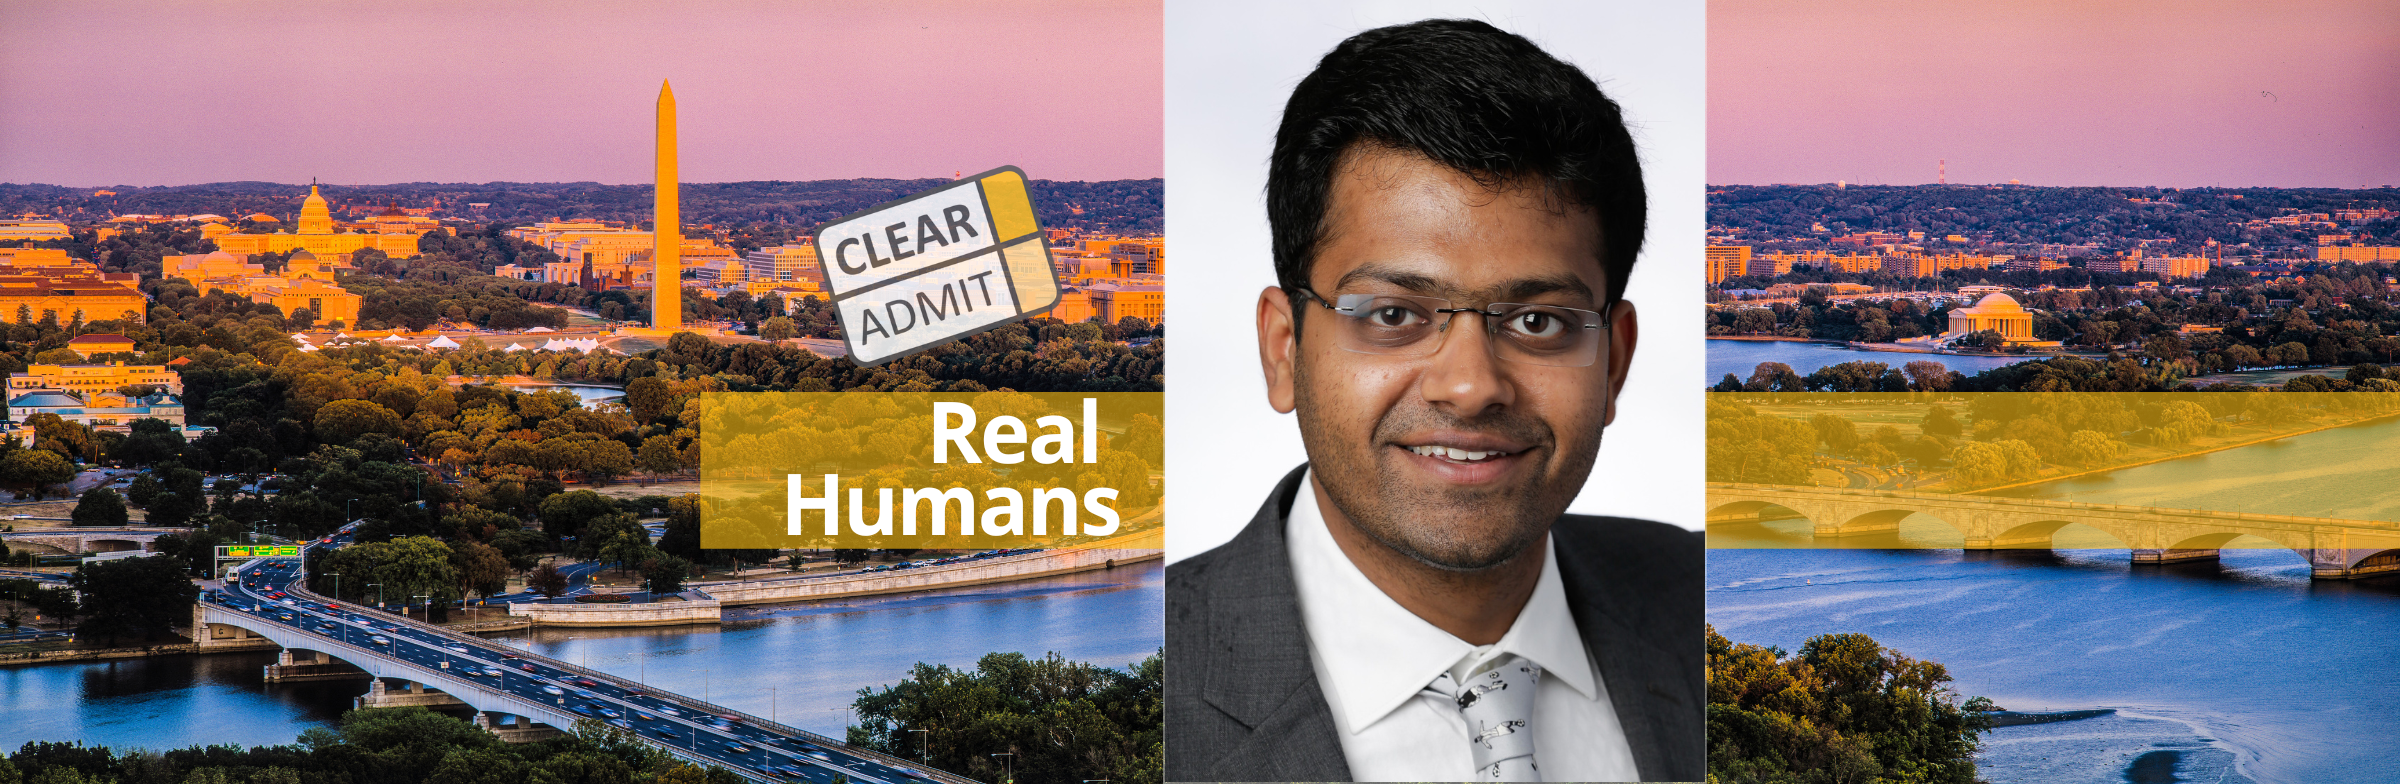 Image for Real Humans of Bain & Co.: Anuj Padia, UNC Kenan-Flagler ’20, Consultant